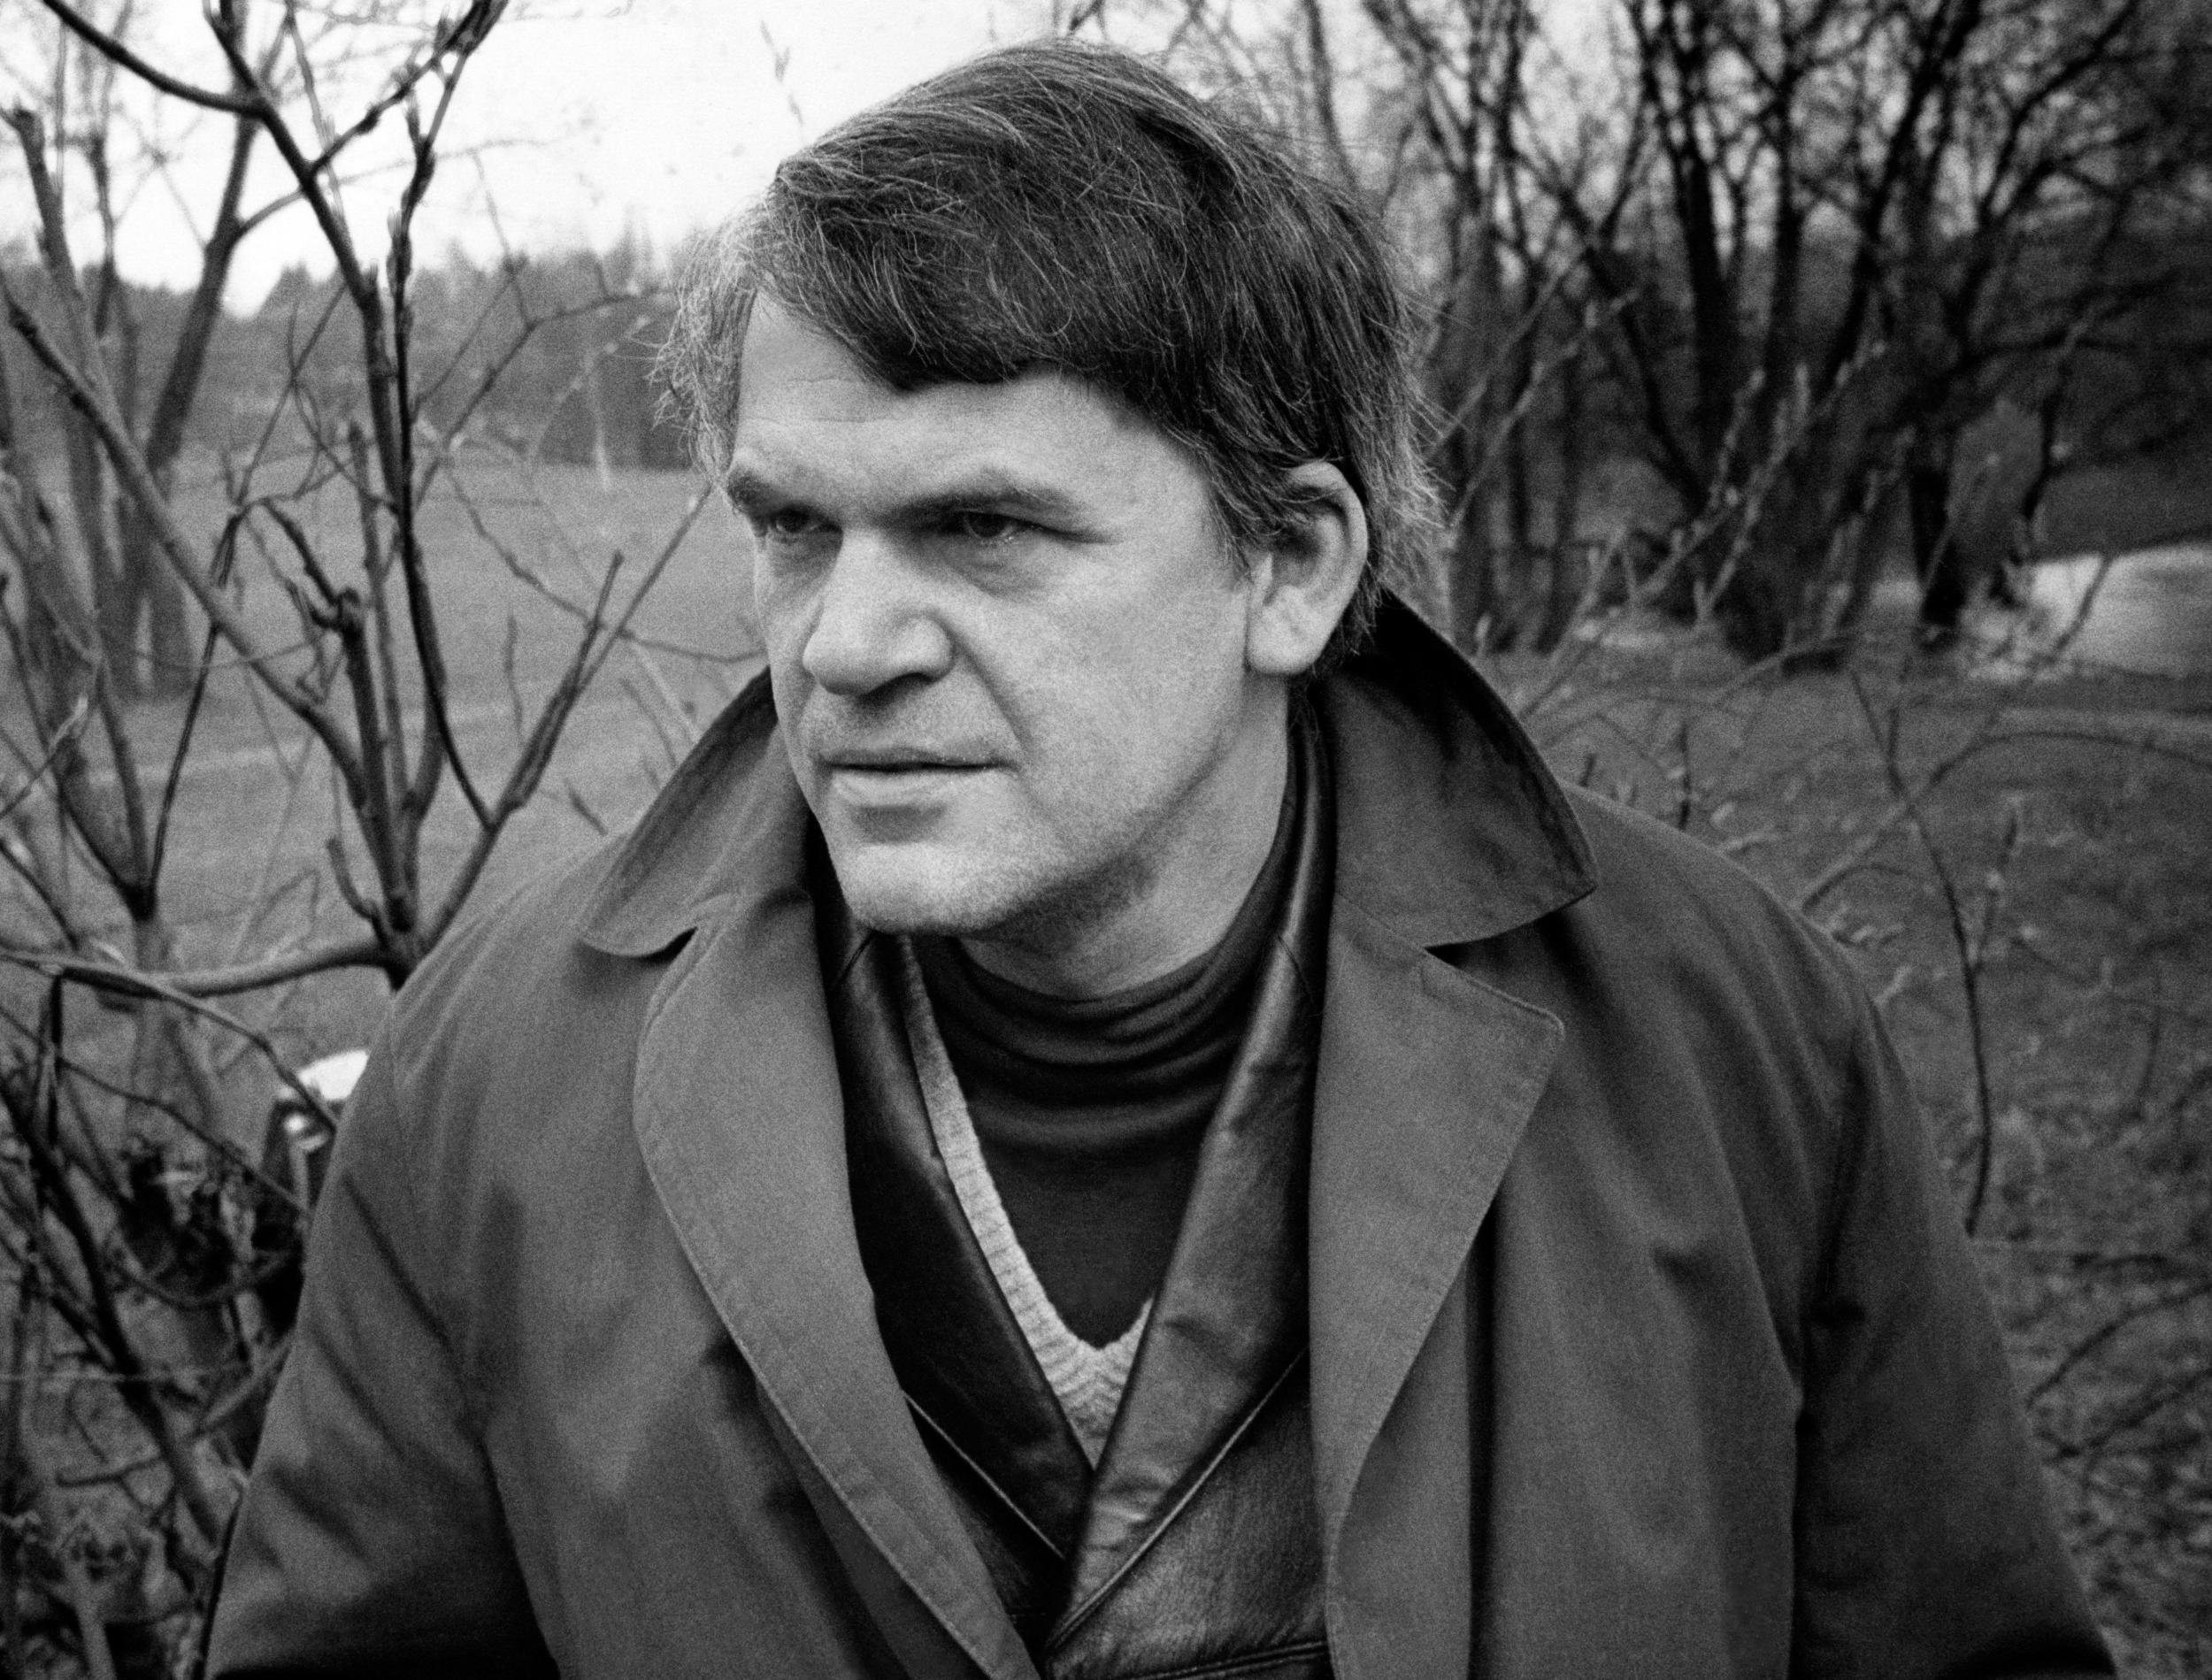 Milan Kundera made the journey from communist to outcast